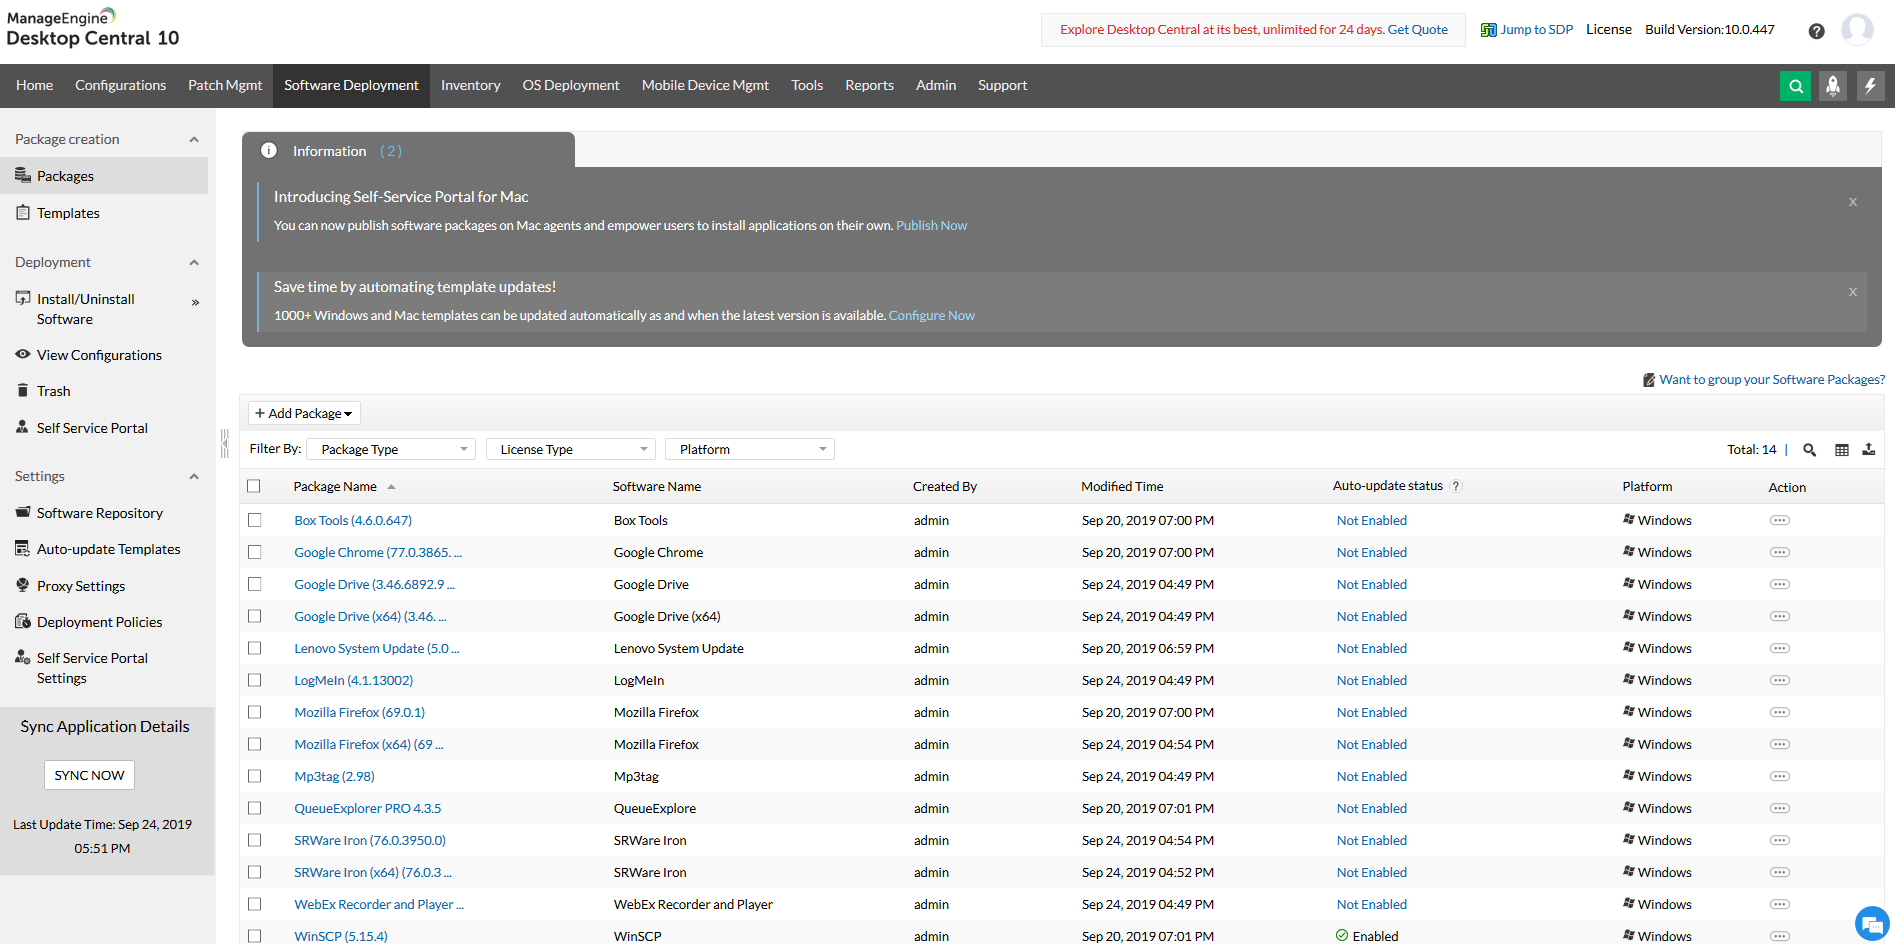 Dashboard ManageEngine Endpoint Central paquetes de software